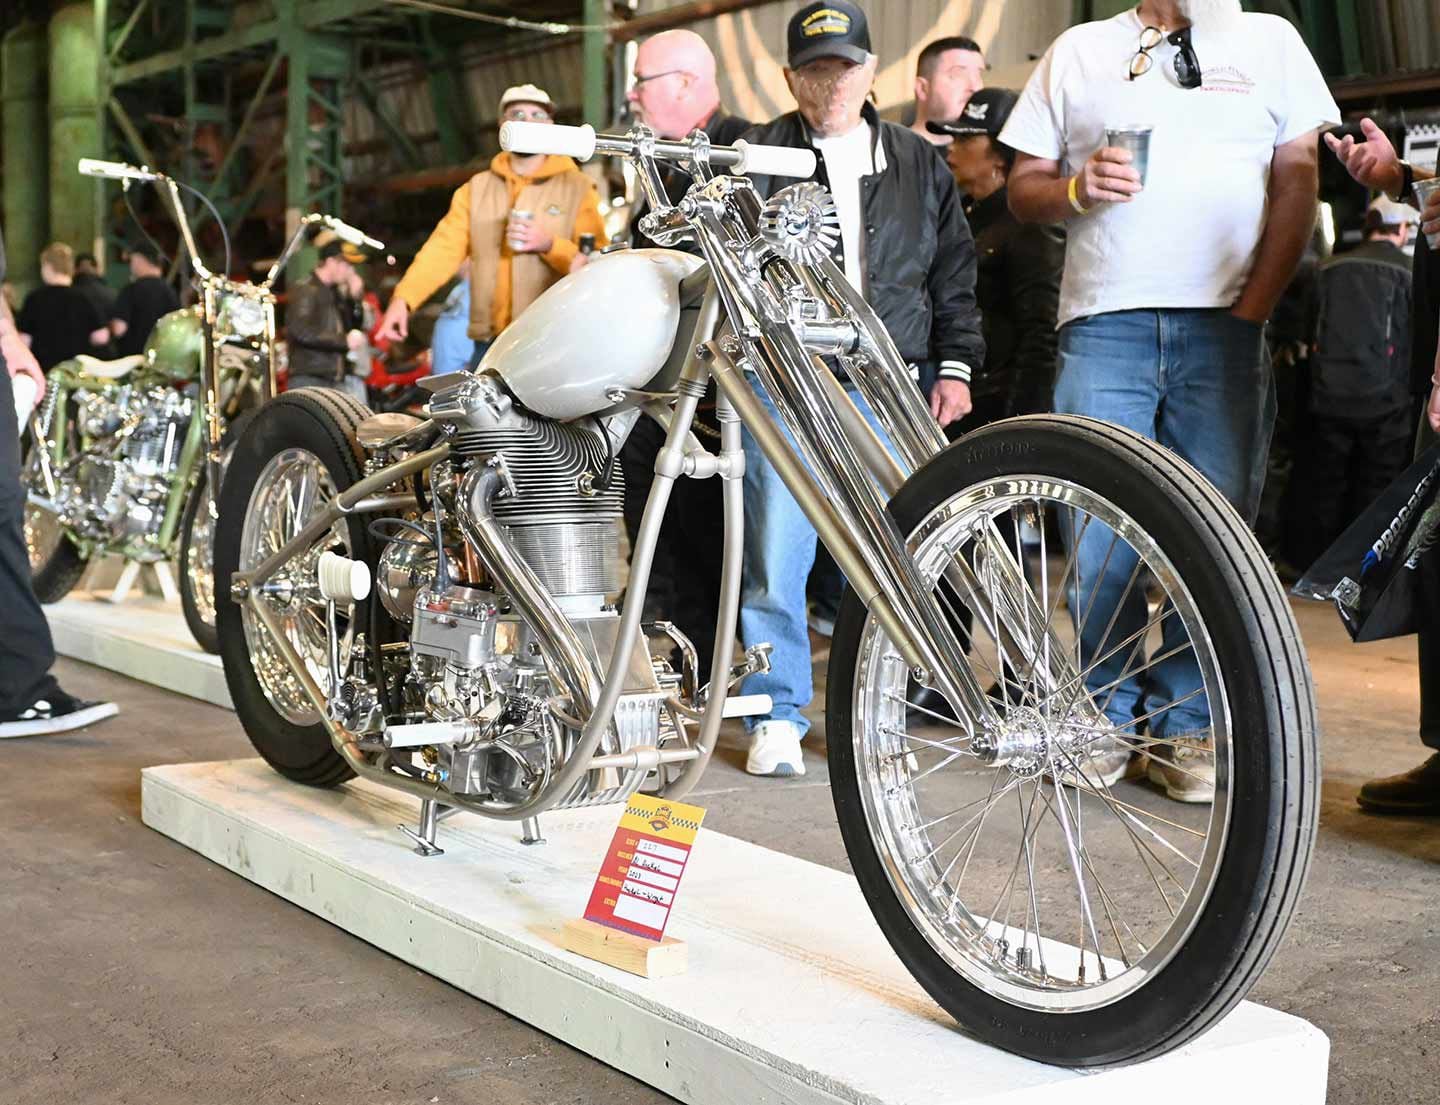 Al Hackel’s custom won the This Is A Bad Idea award for his scratch-built custom powered by a cast-off cylinder from a helicopter engine. “I originally wanted a Knucklehead, but they were too expensive,” he told Thor Drake as he accepted the award.